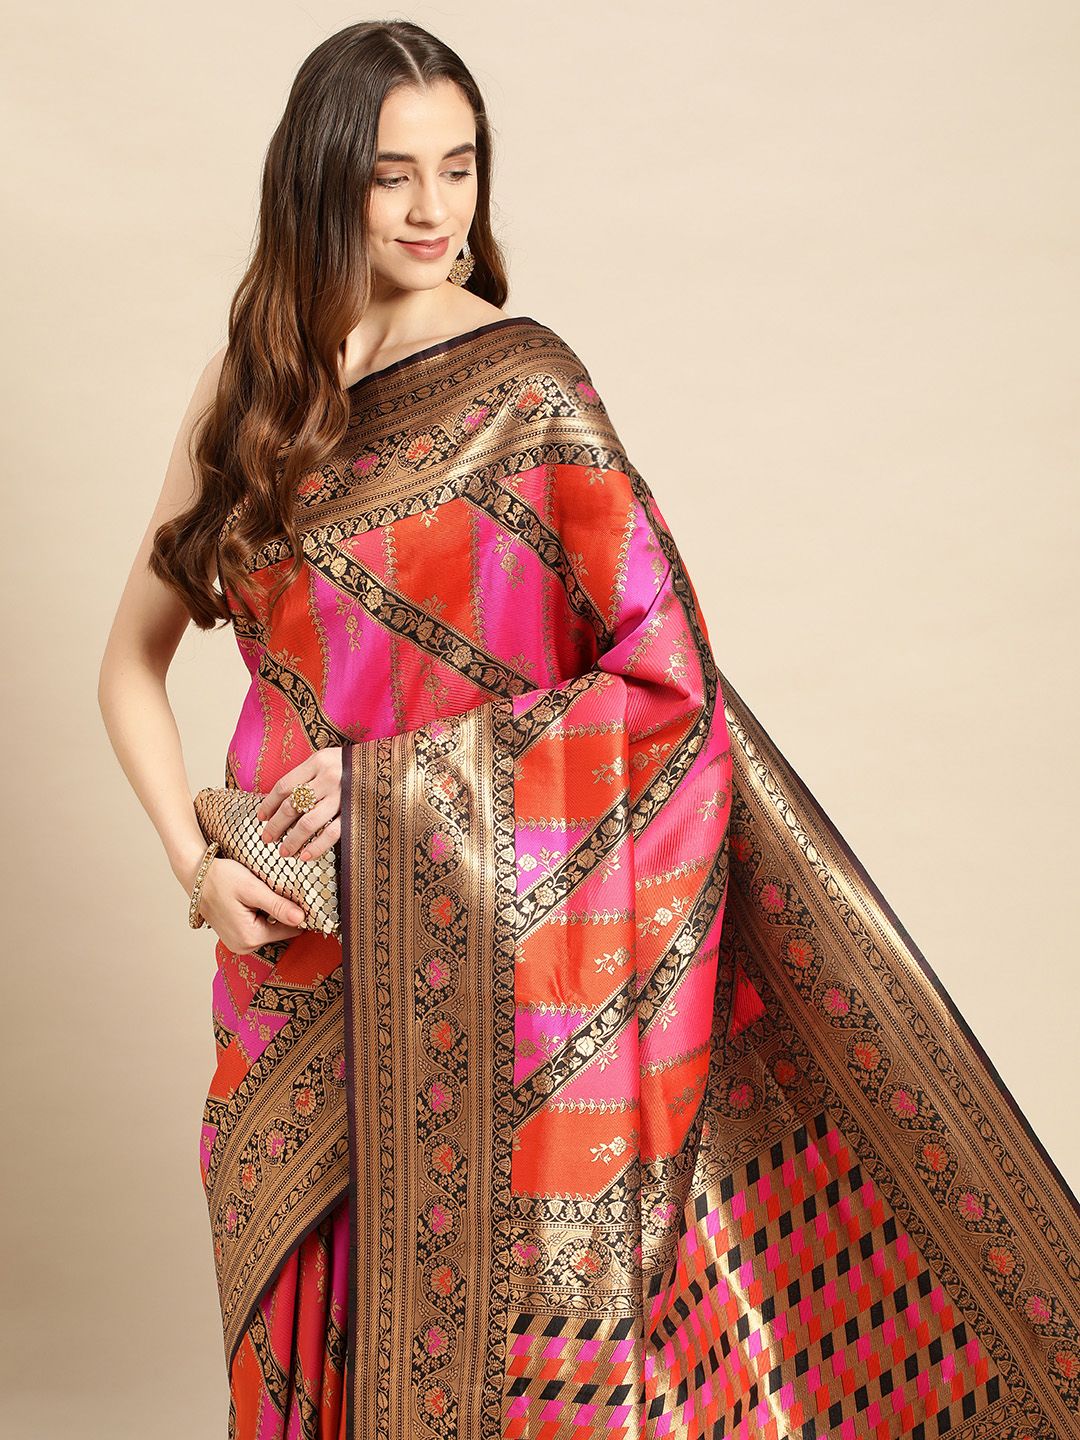 Black Color Gorgeous Zari Border Silk Saree Perfect Blend of Tradition and Glamour